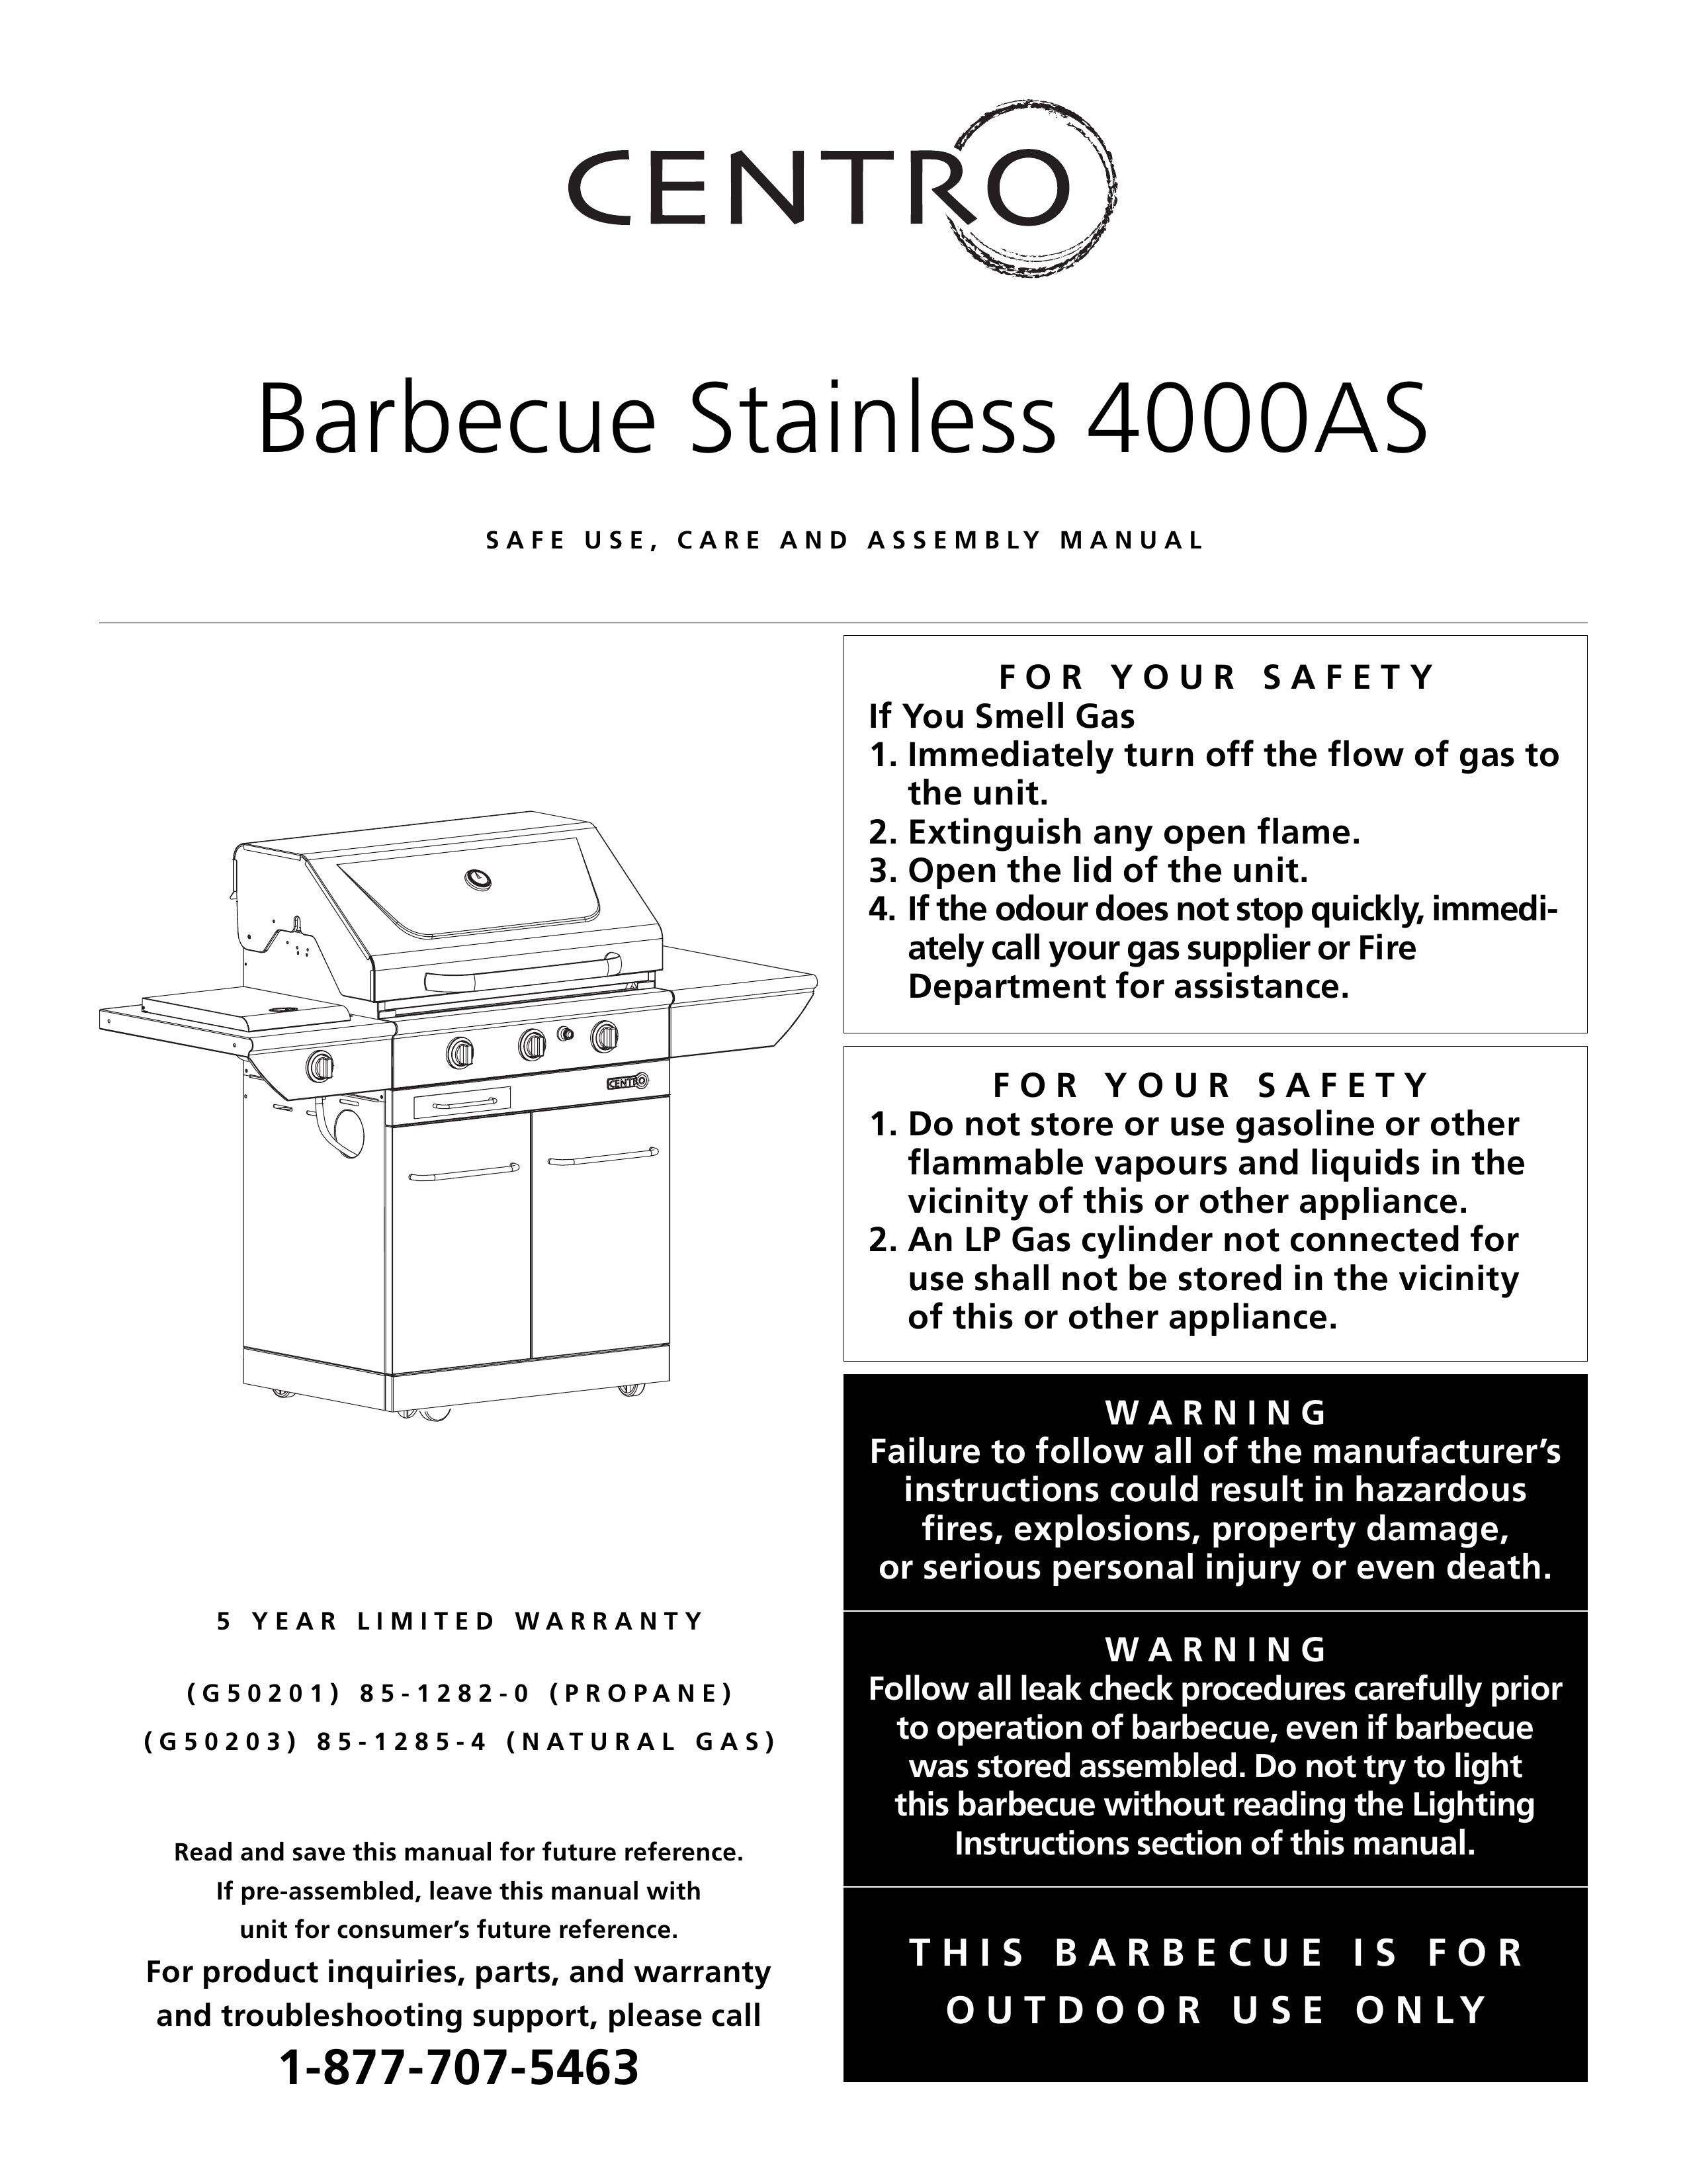 Centro 4000AS Gas Grill User Manual